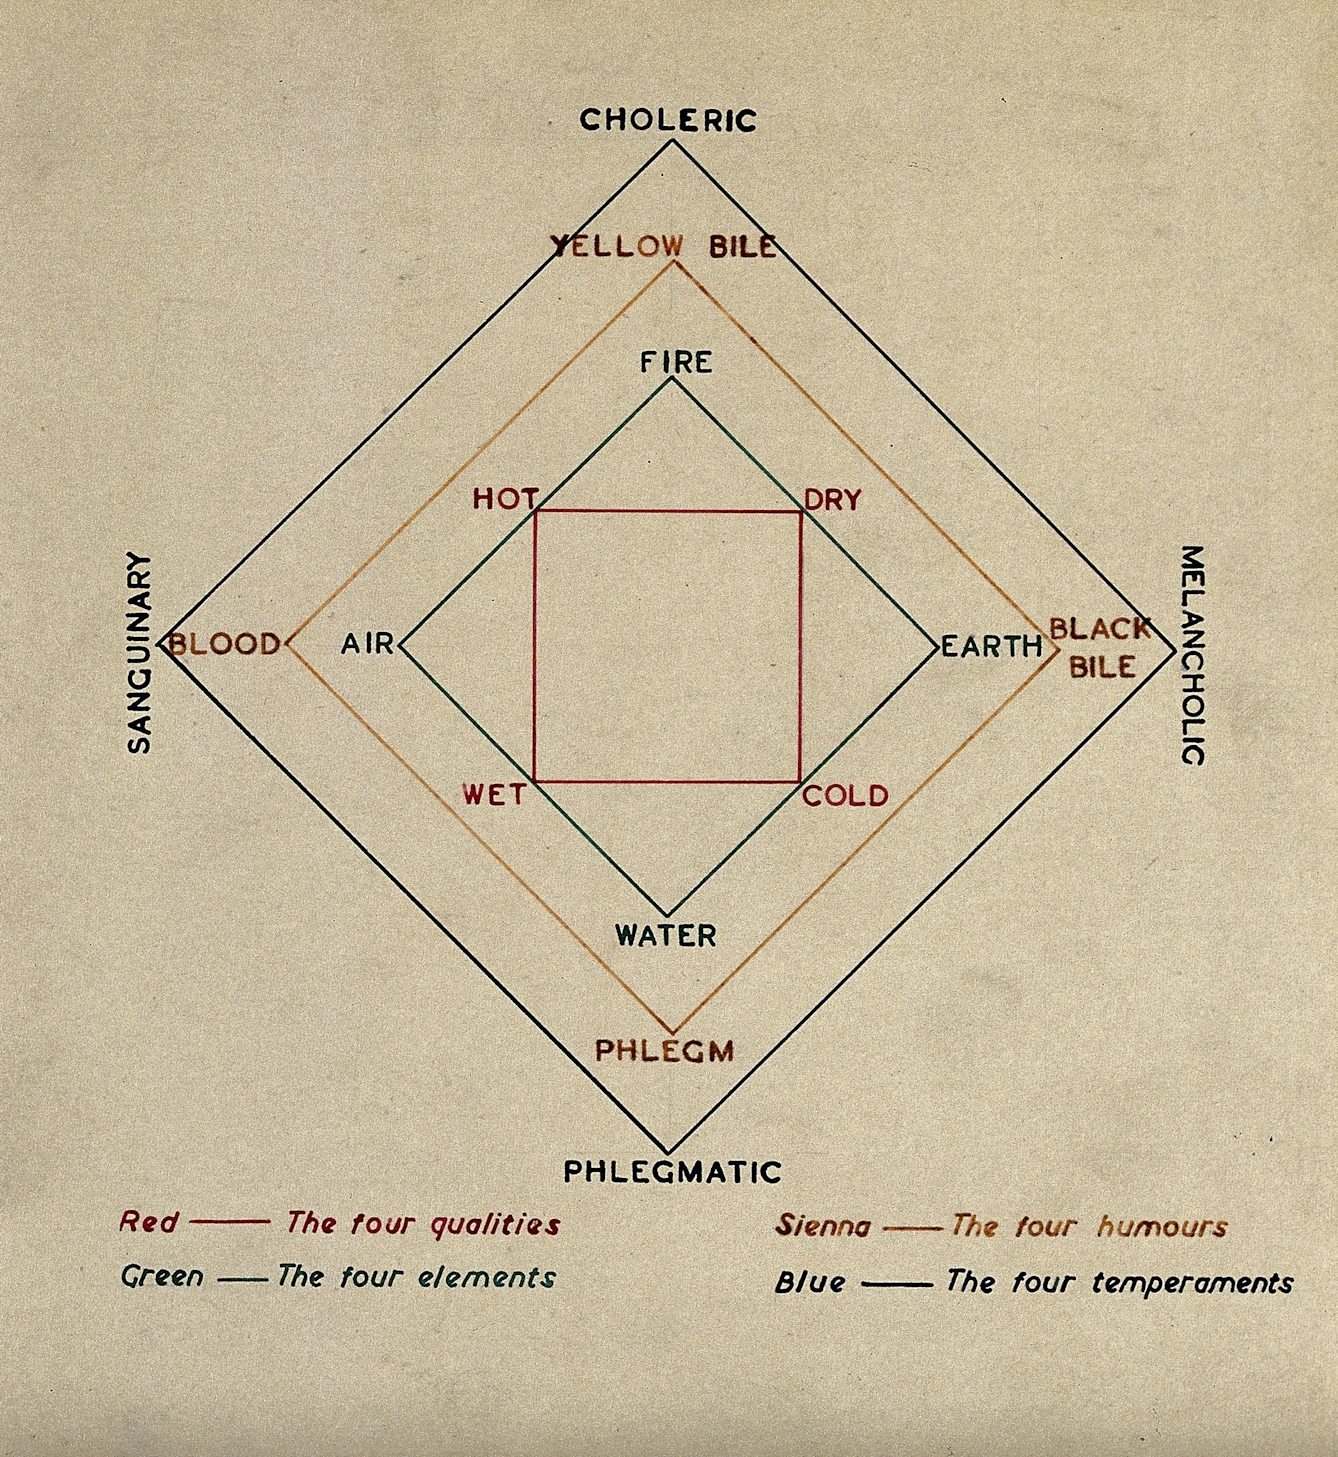 A diagram showing in red the four qualities; in green the four elements; in sienna the four humours; and in blue, the four temperaments.